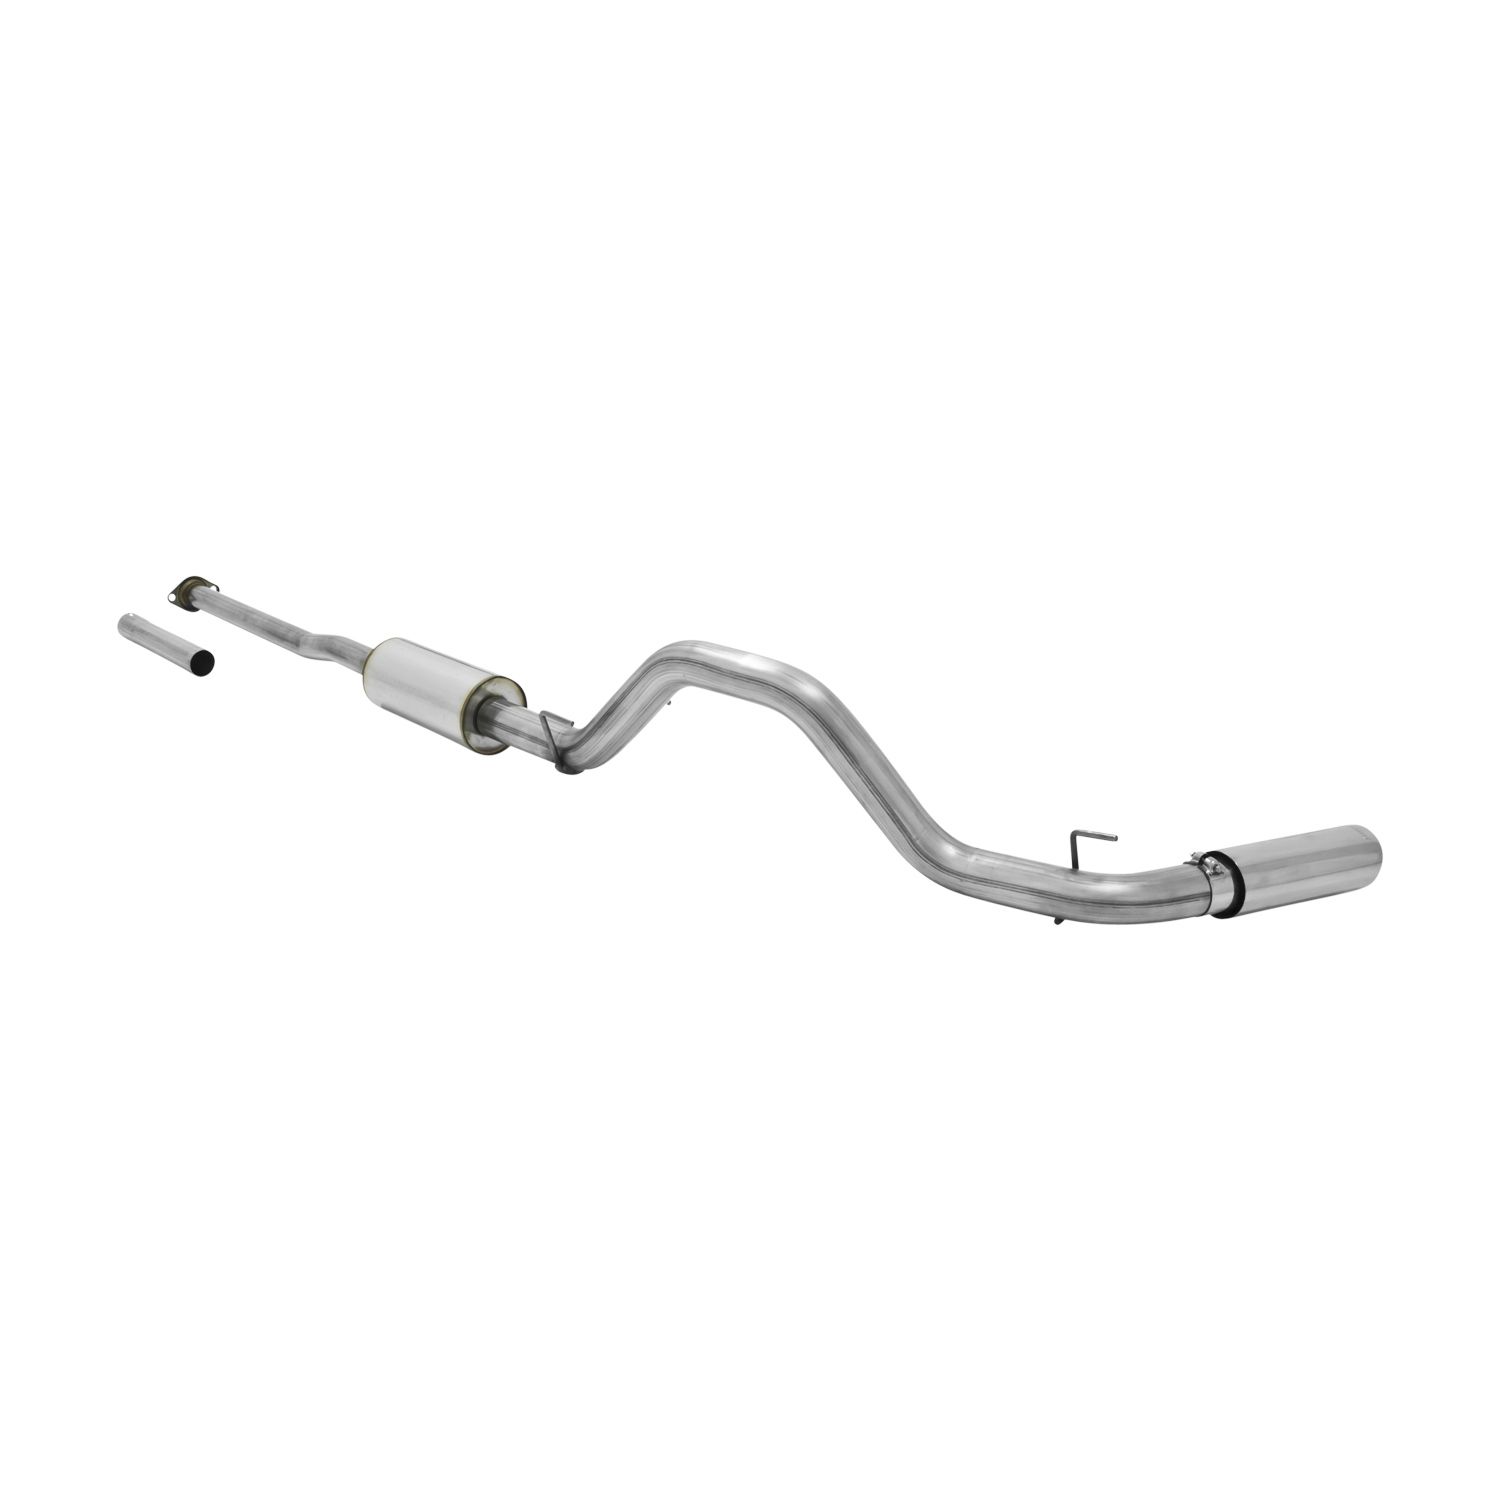 2013-2015 Toyota Tacoma Base/Pre Runner 4.0L Flowmaster dBX Cat-Back Exhaust